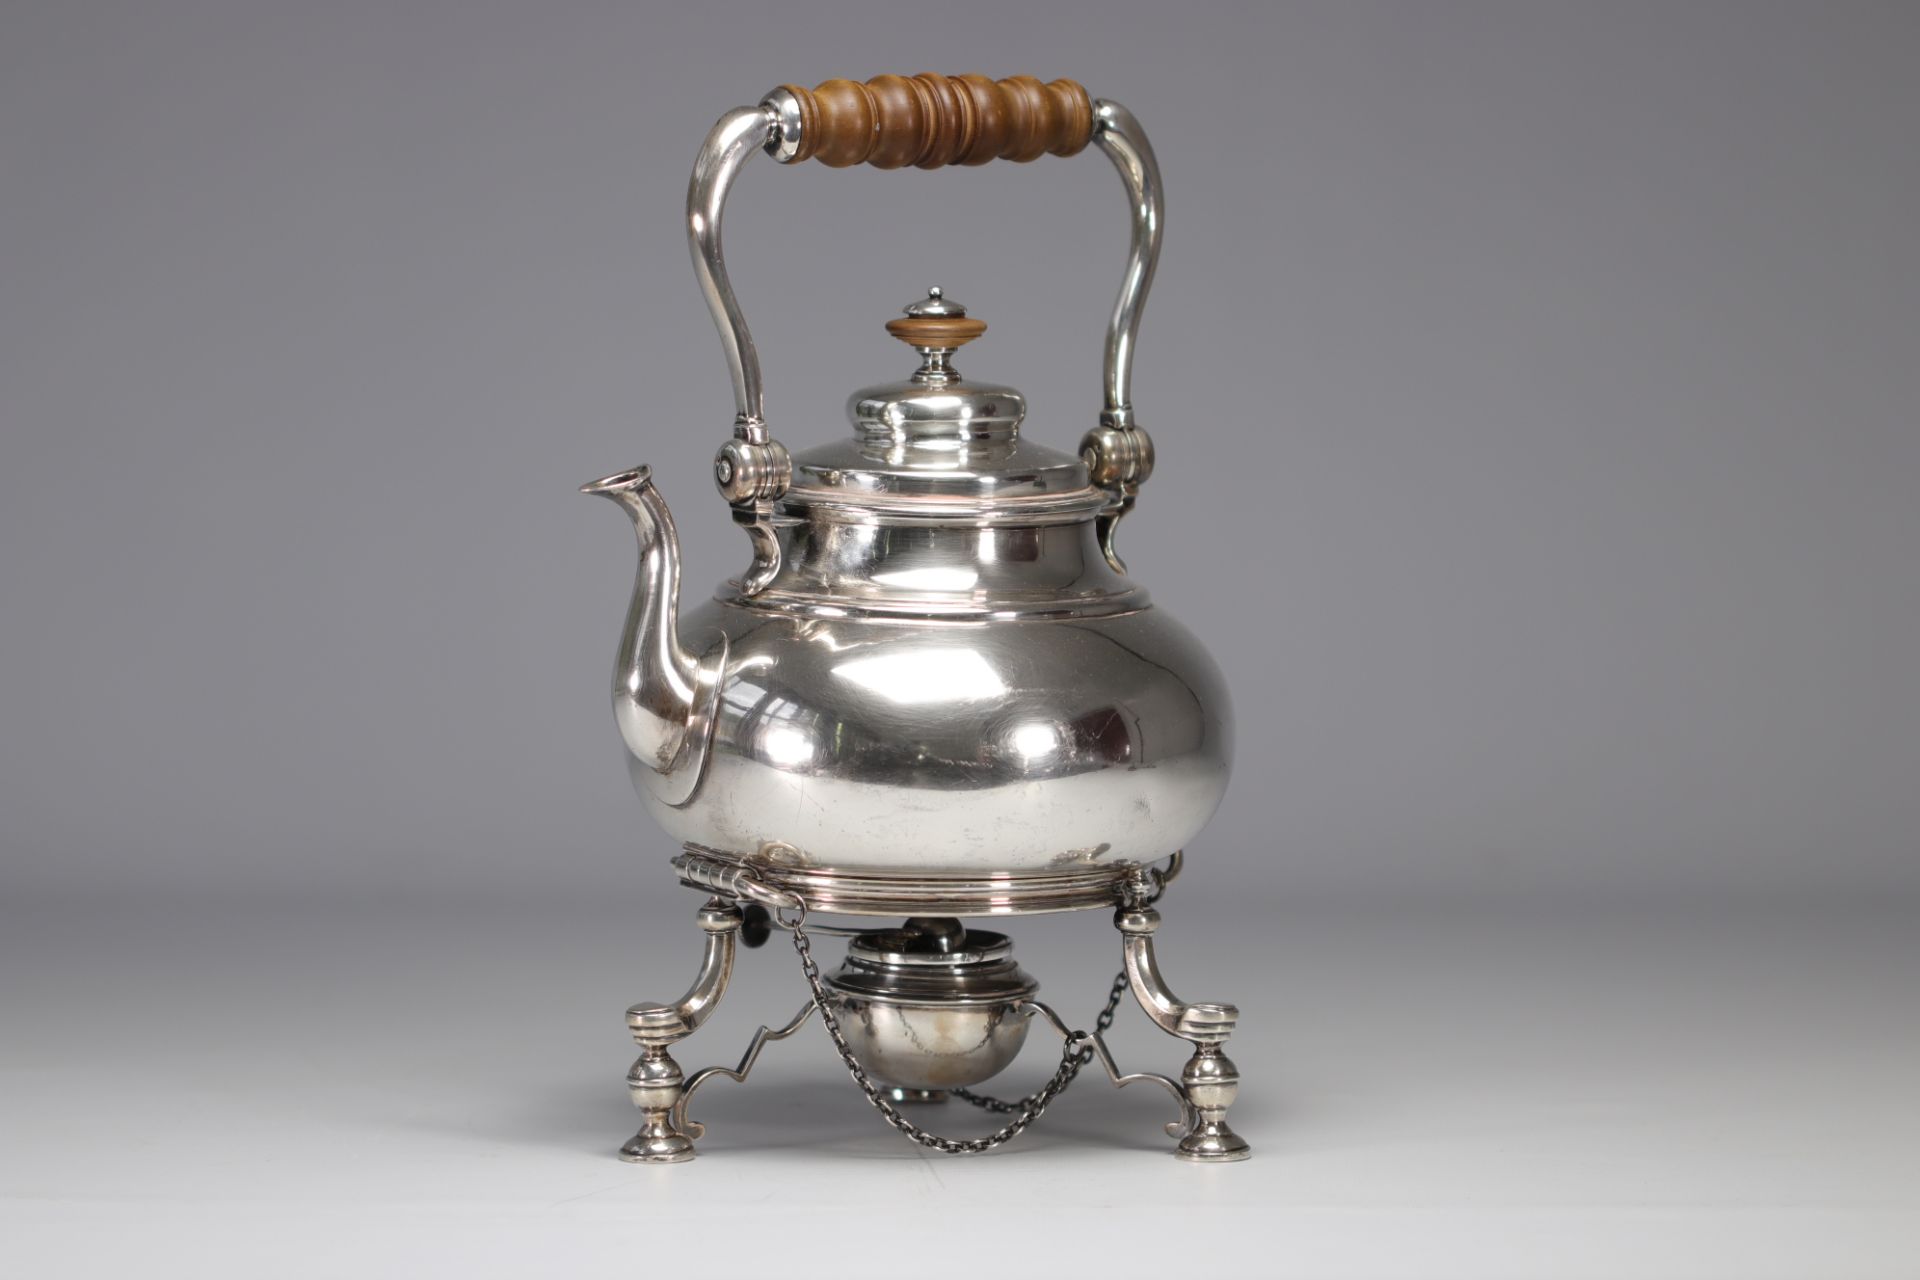 Teapot and teapot warmer in sterling silver with English hallmark - Image 4 of 8